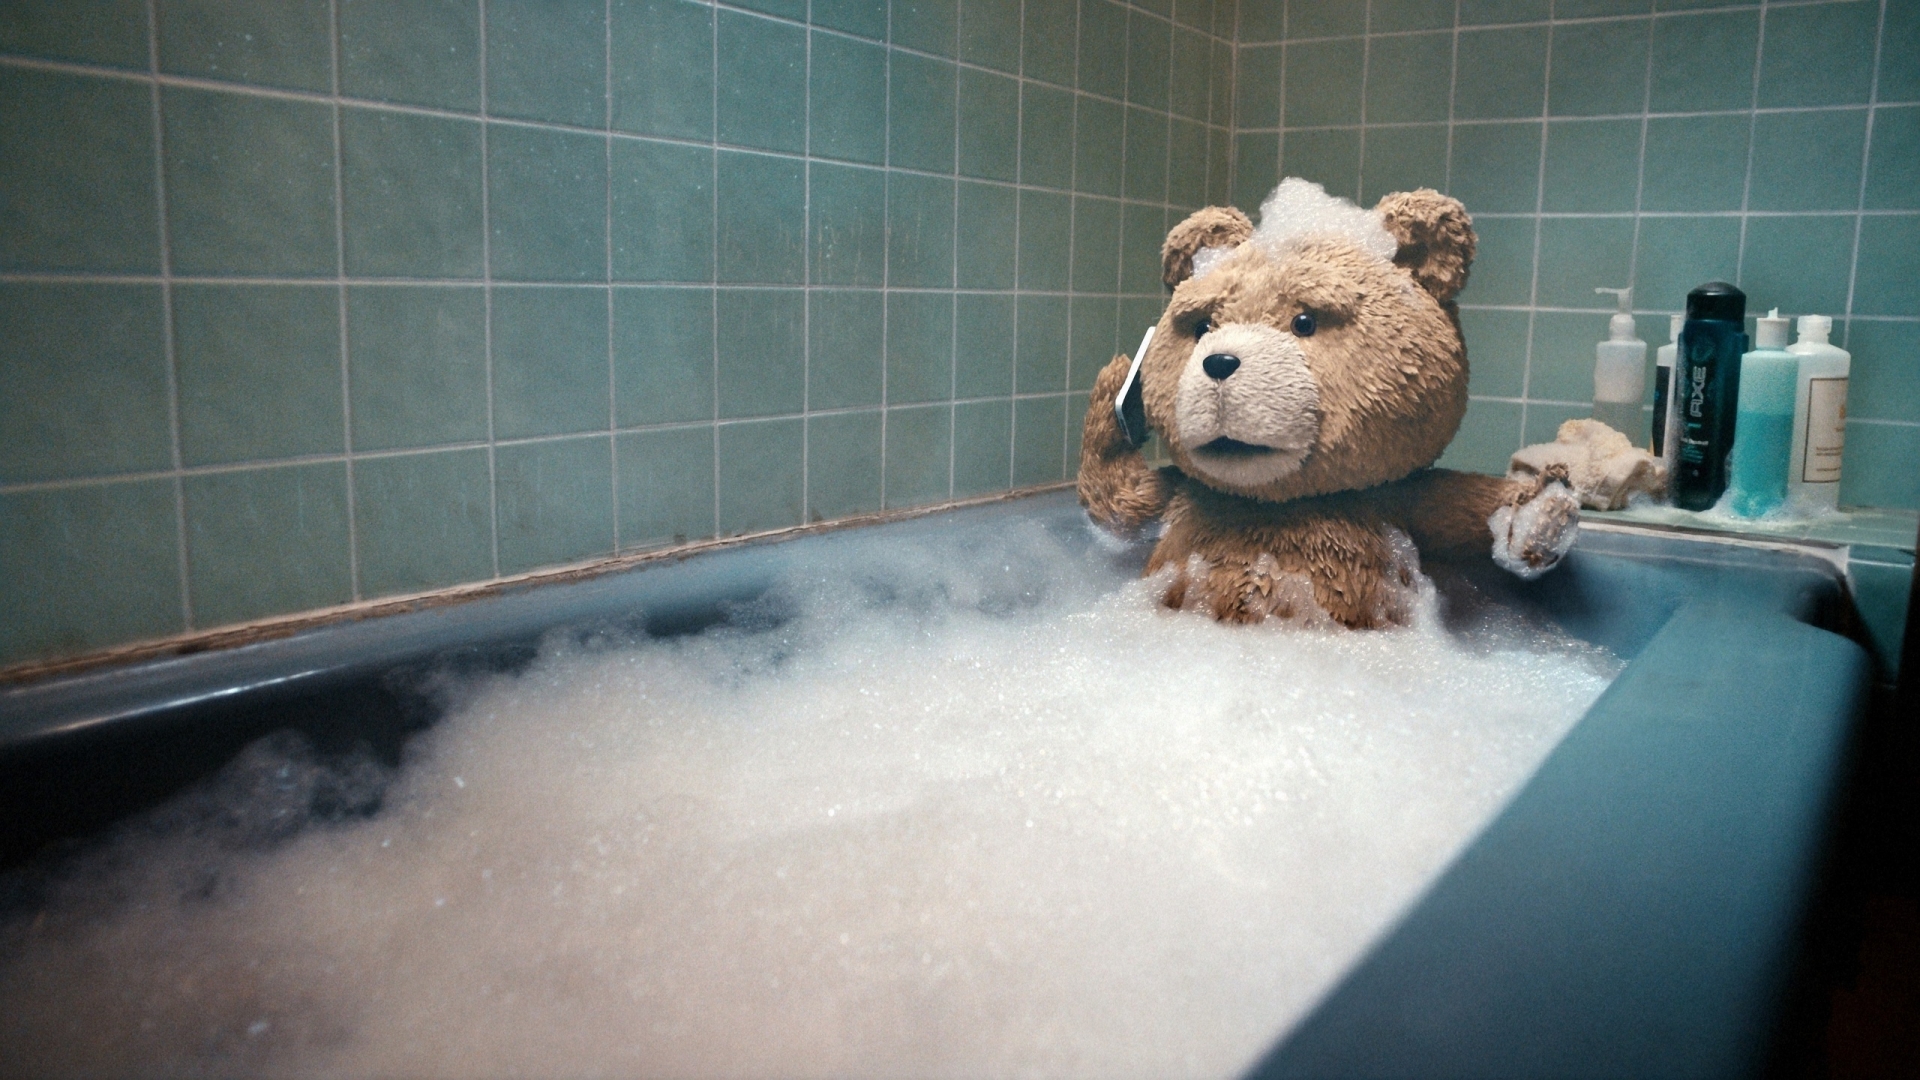 Ted taking a Bath for 1920 x 1080 HDTV 1080p resolution